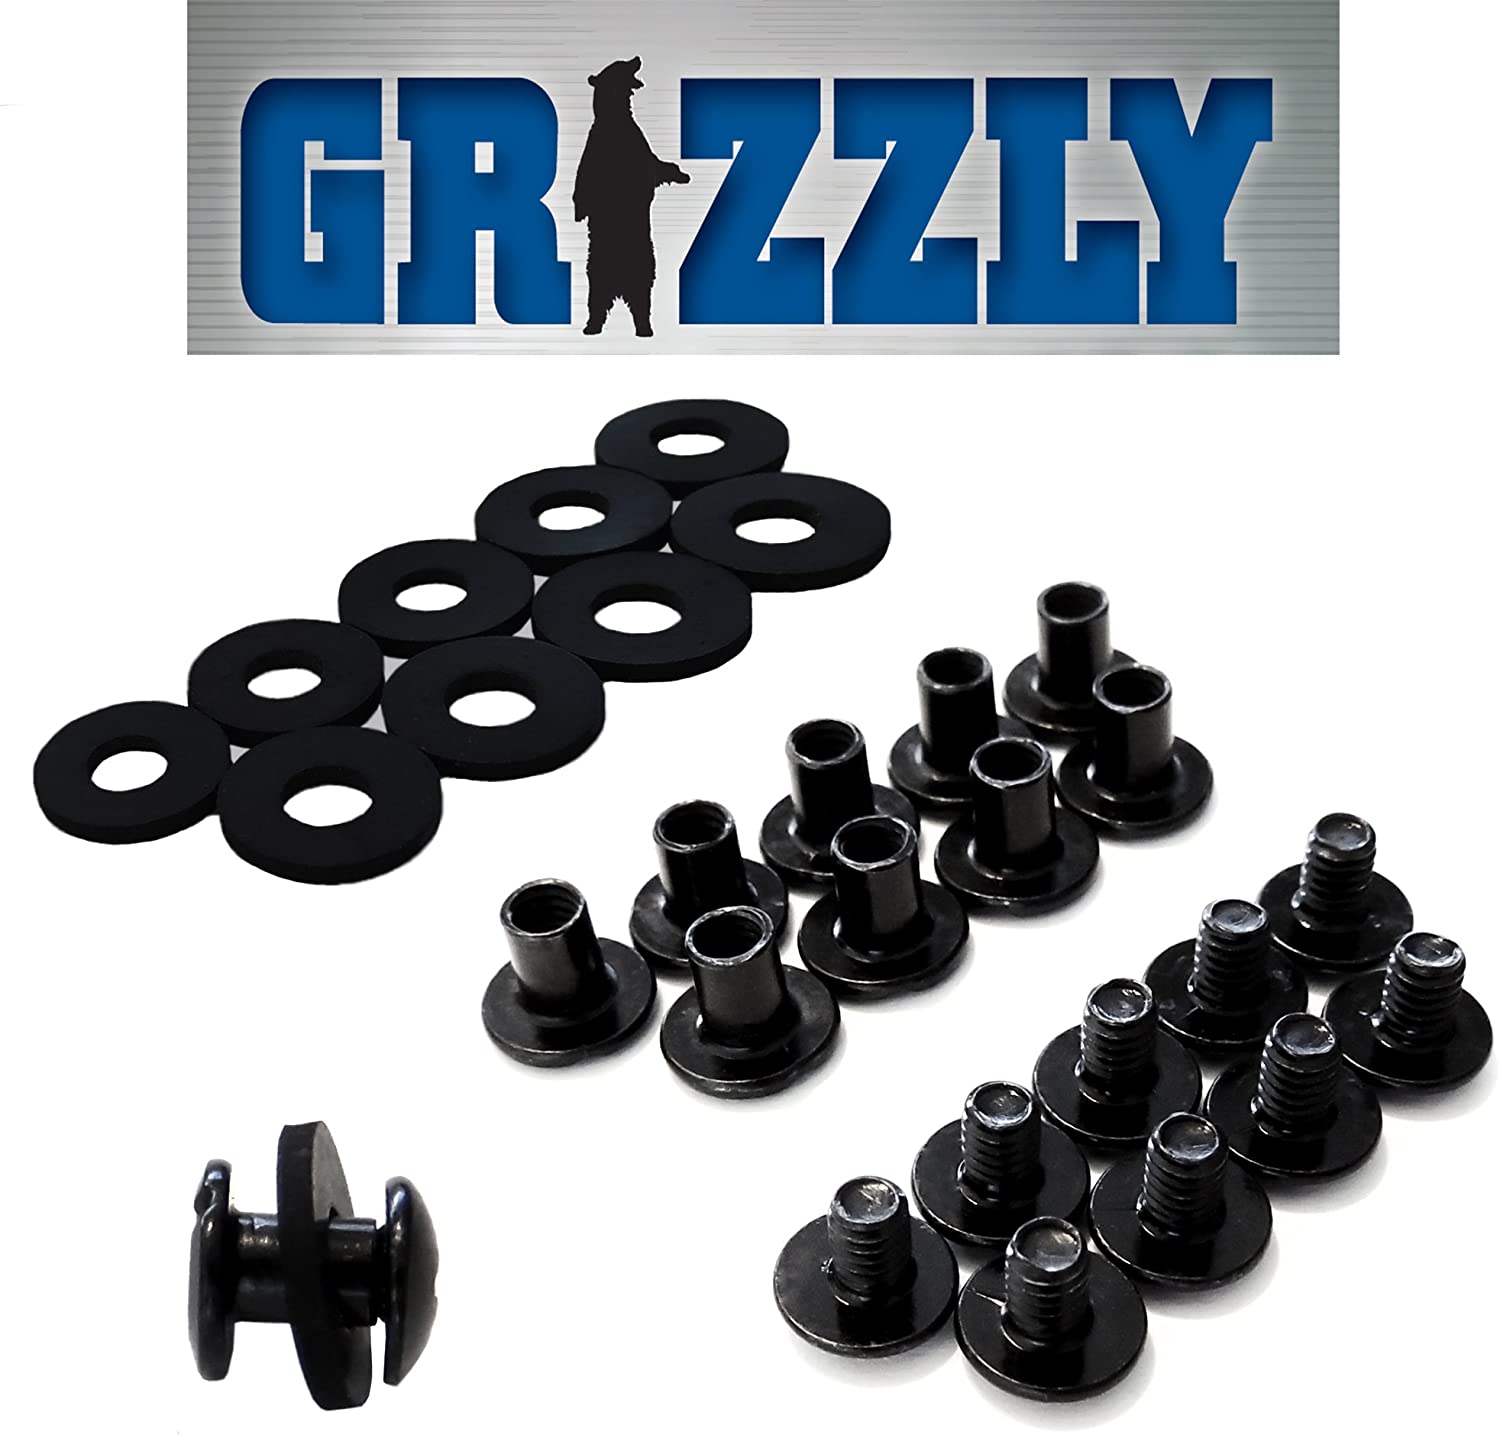 Grizzly Black Chicago Screws For Leather/Kydex Gun Holsters/Clips and Knife Sheaths 1/4 Inch - 10 Pack